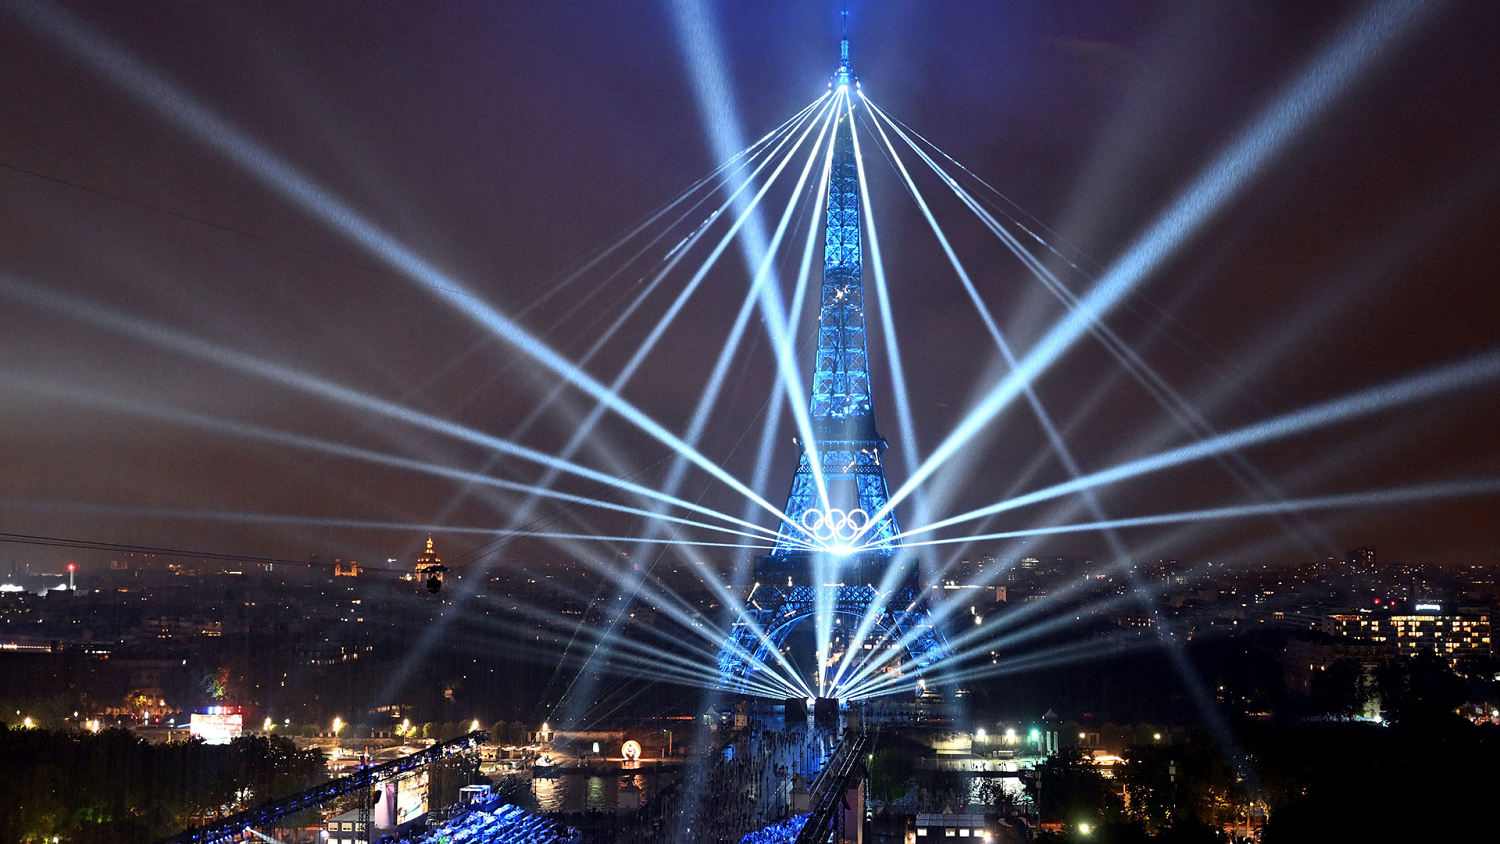 Elaborate light show projected from Eiffel Tower